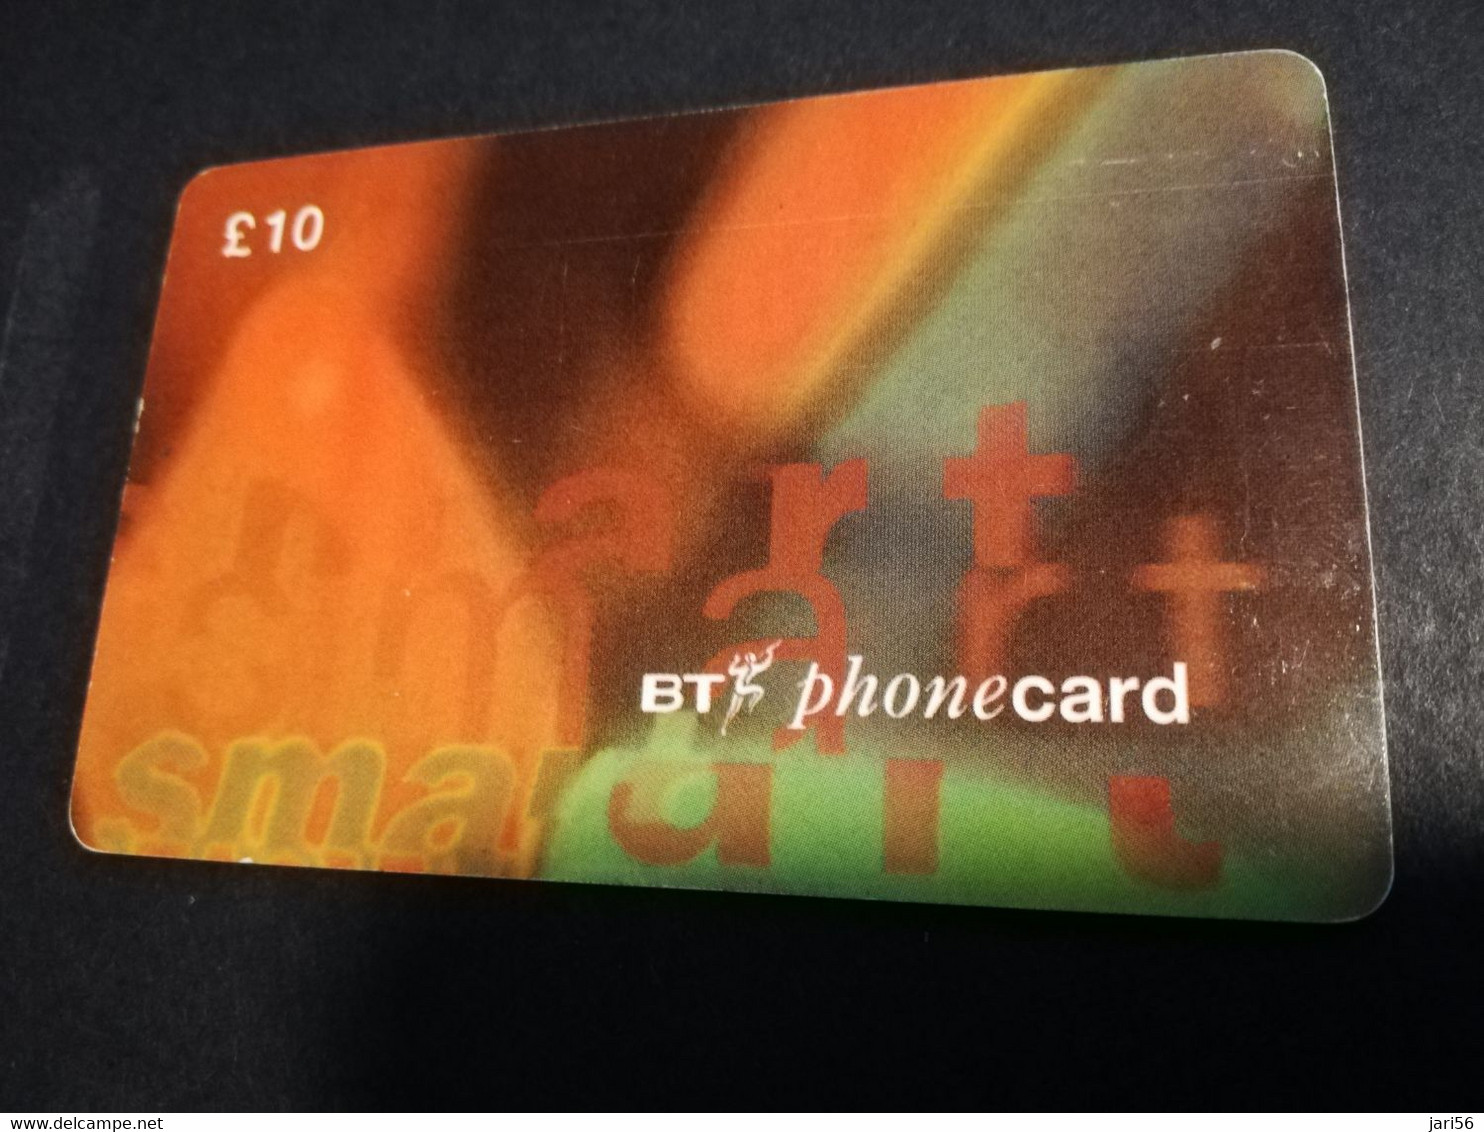 GREAT BRETAGNE  CHIPCARDS / TEST CARD 10 POUND    EXPIRY DATE 09/96   PERFECT  CONDITION     **4597** - BT General